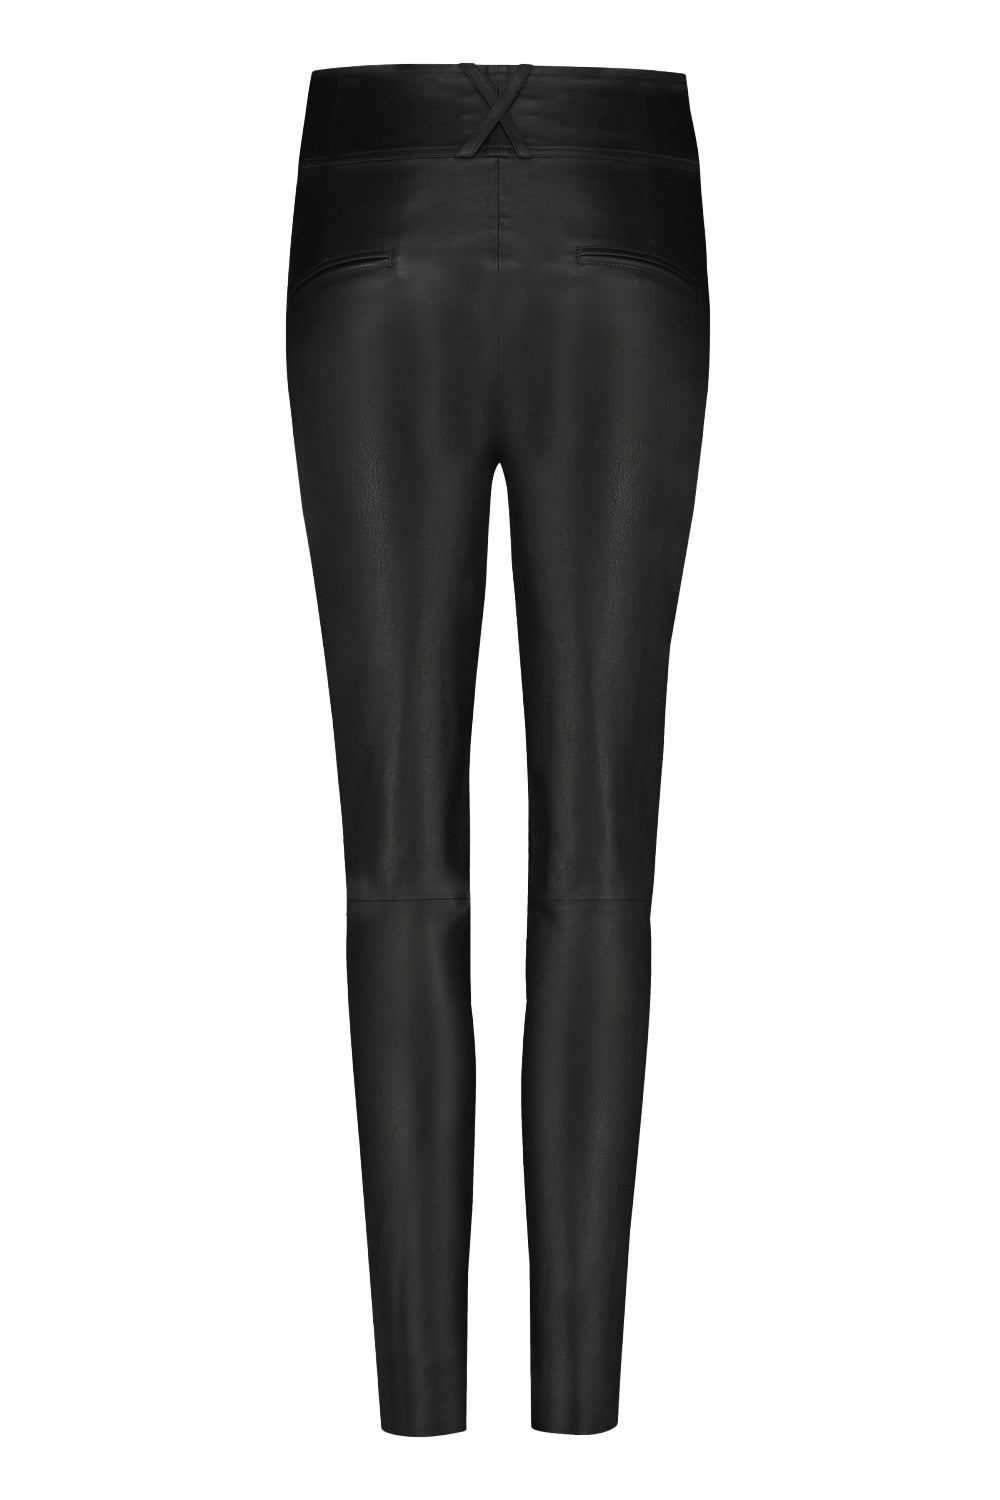 Pananty Leather Pant - Black